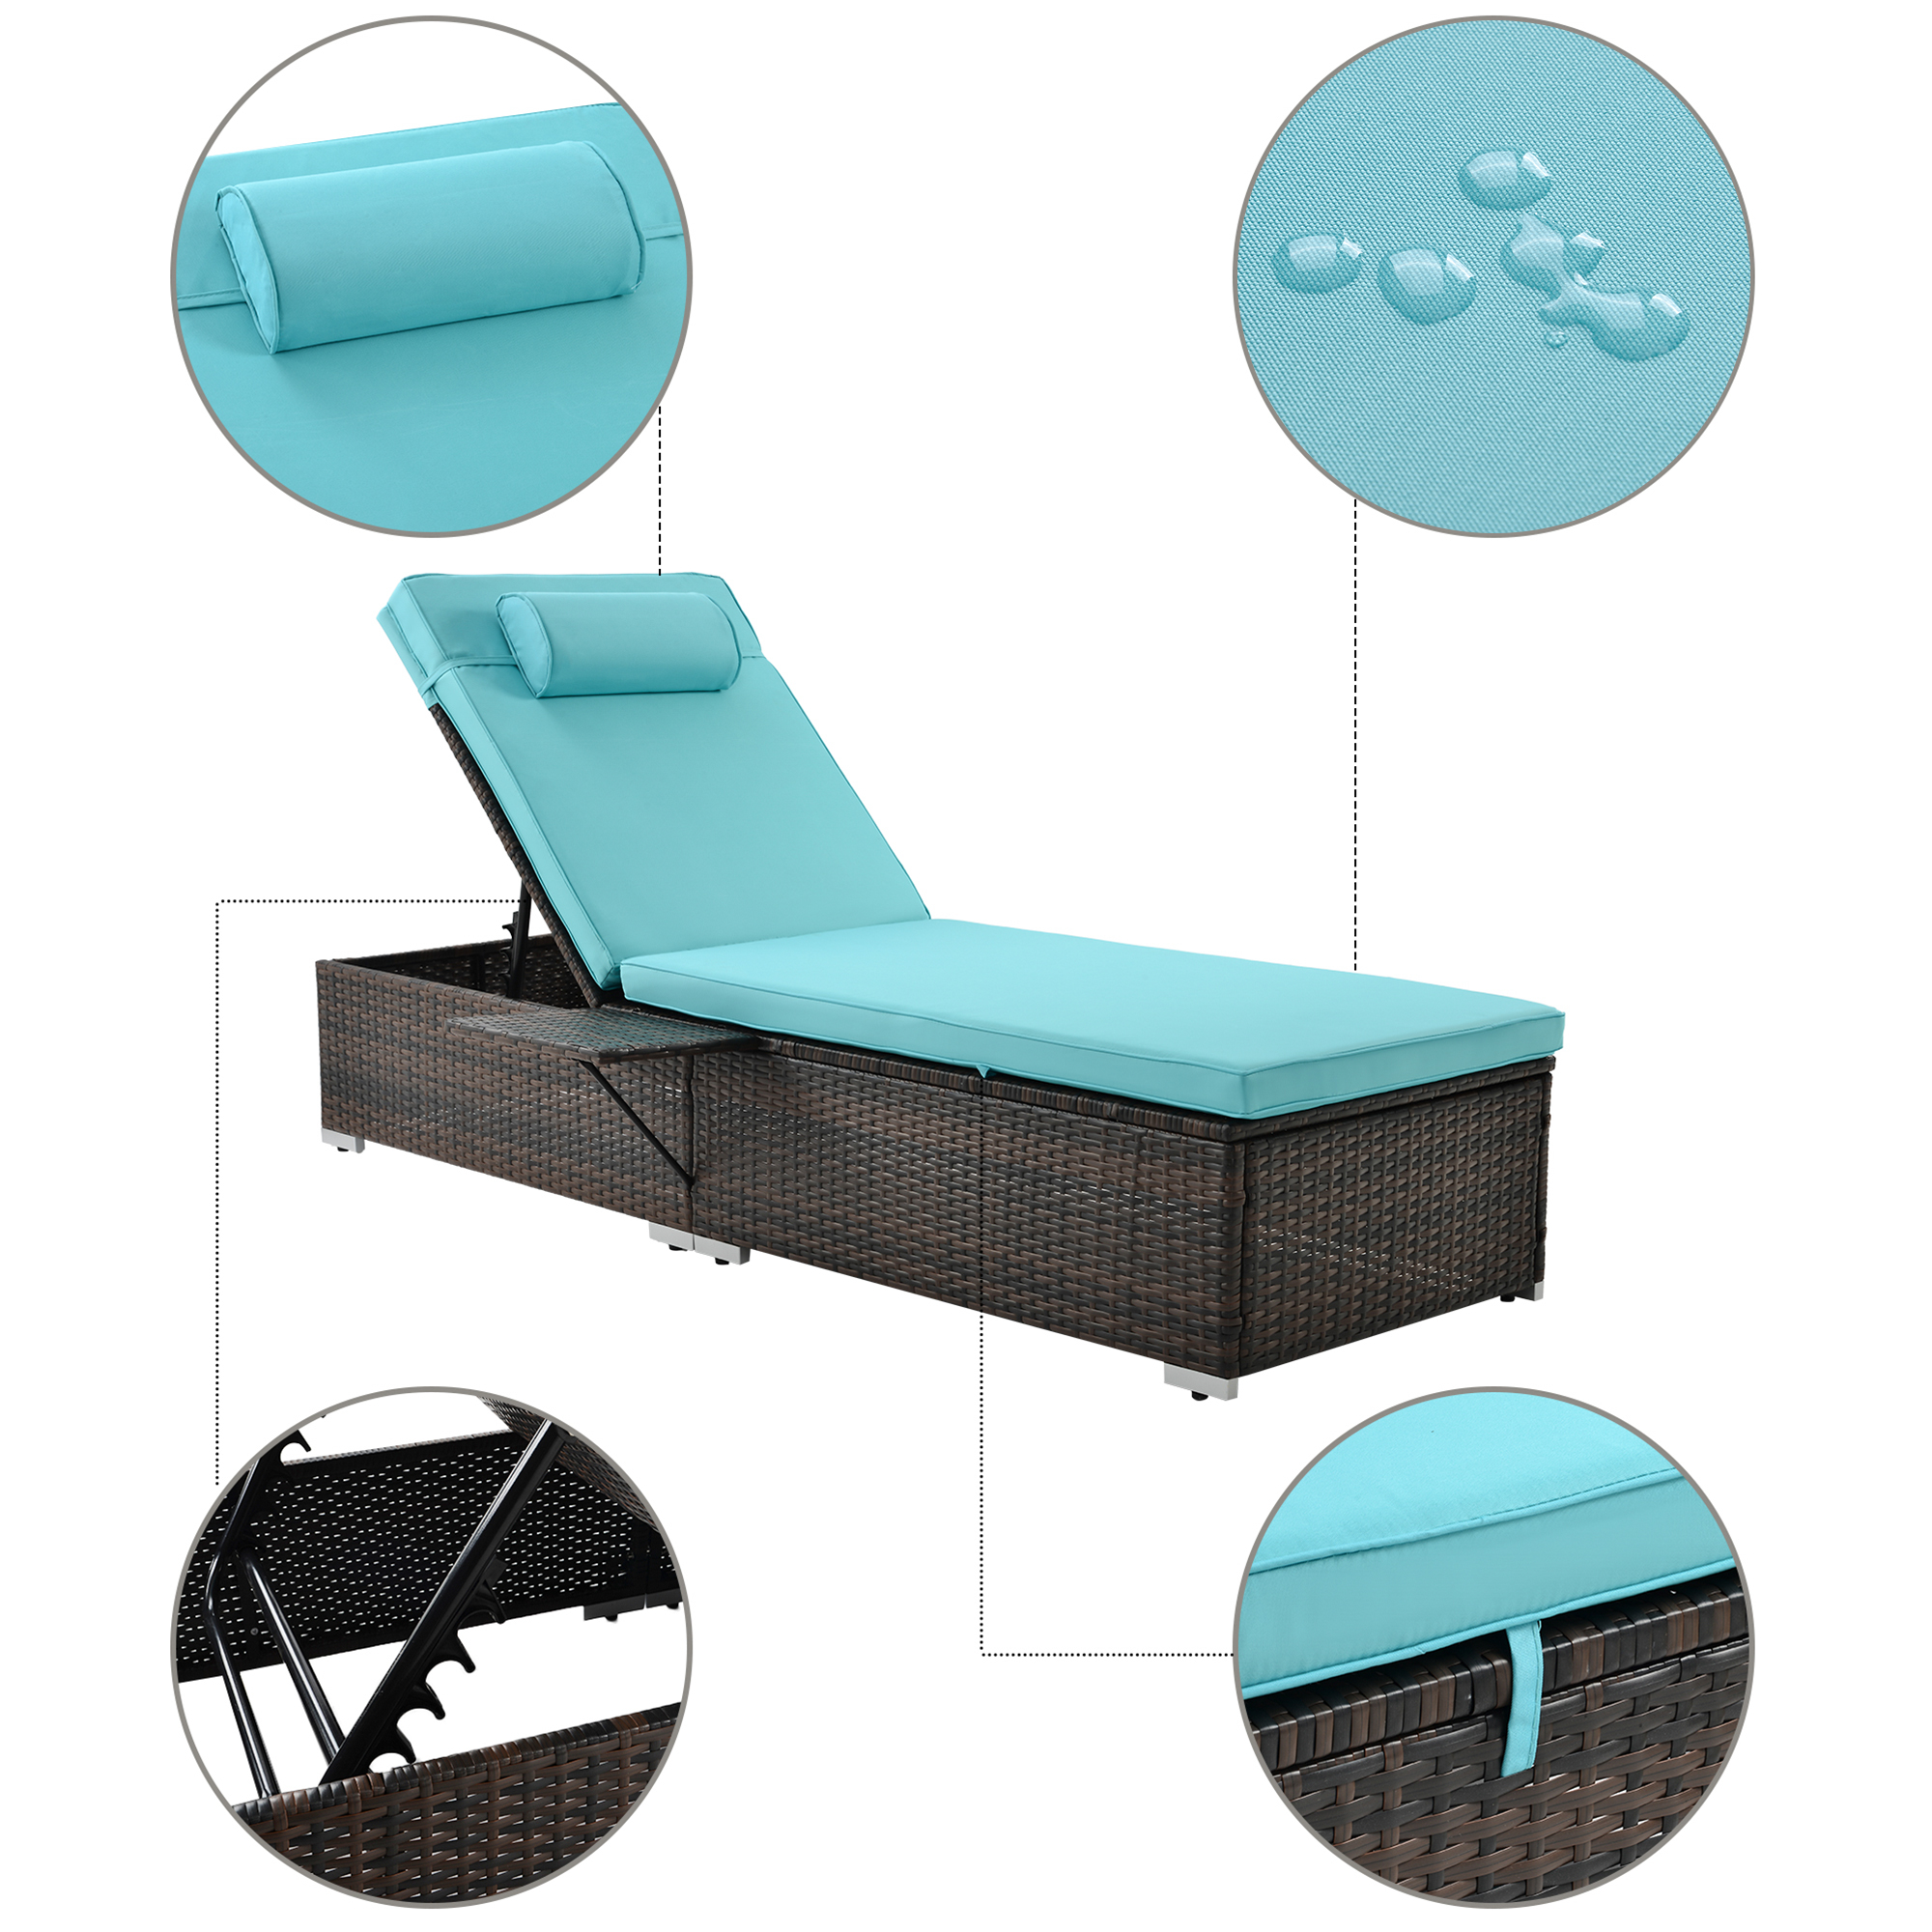 ENYOPRO 2 Piece Outdoor Chaise Lounge Chairs, Adjustable Chaise Chairs with Side Table, Head Pillow and Cushions, for Outdoor Patio Beach Pool Backyard PE Rattan Reclining Chairs Furniture Set, K2697 - image 2 of 11